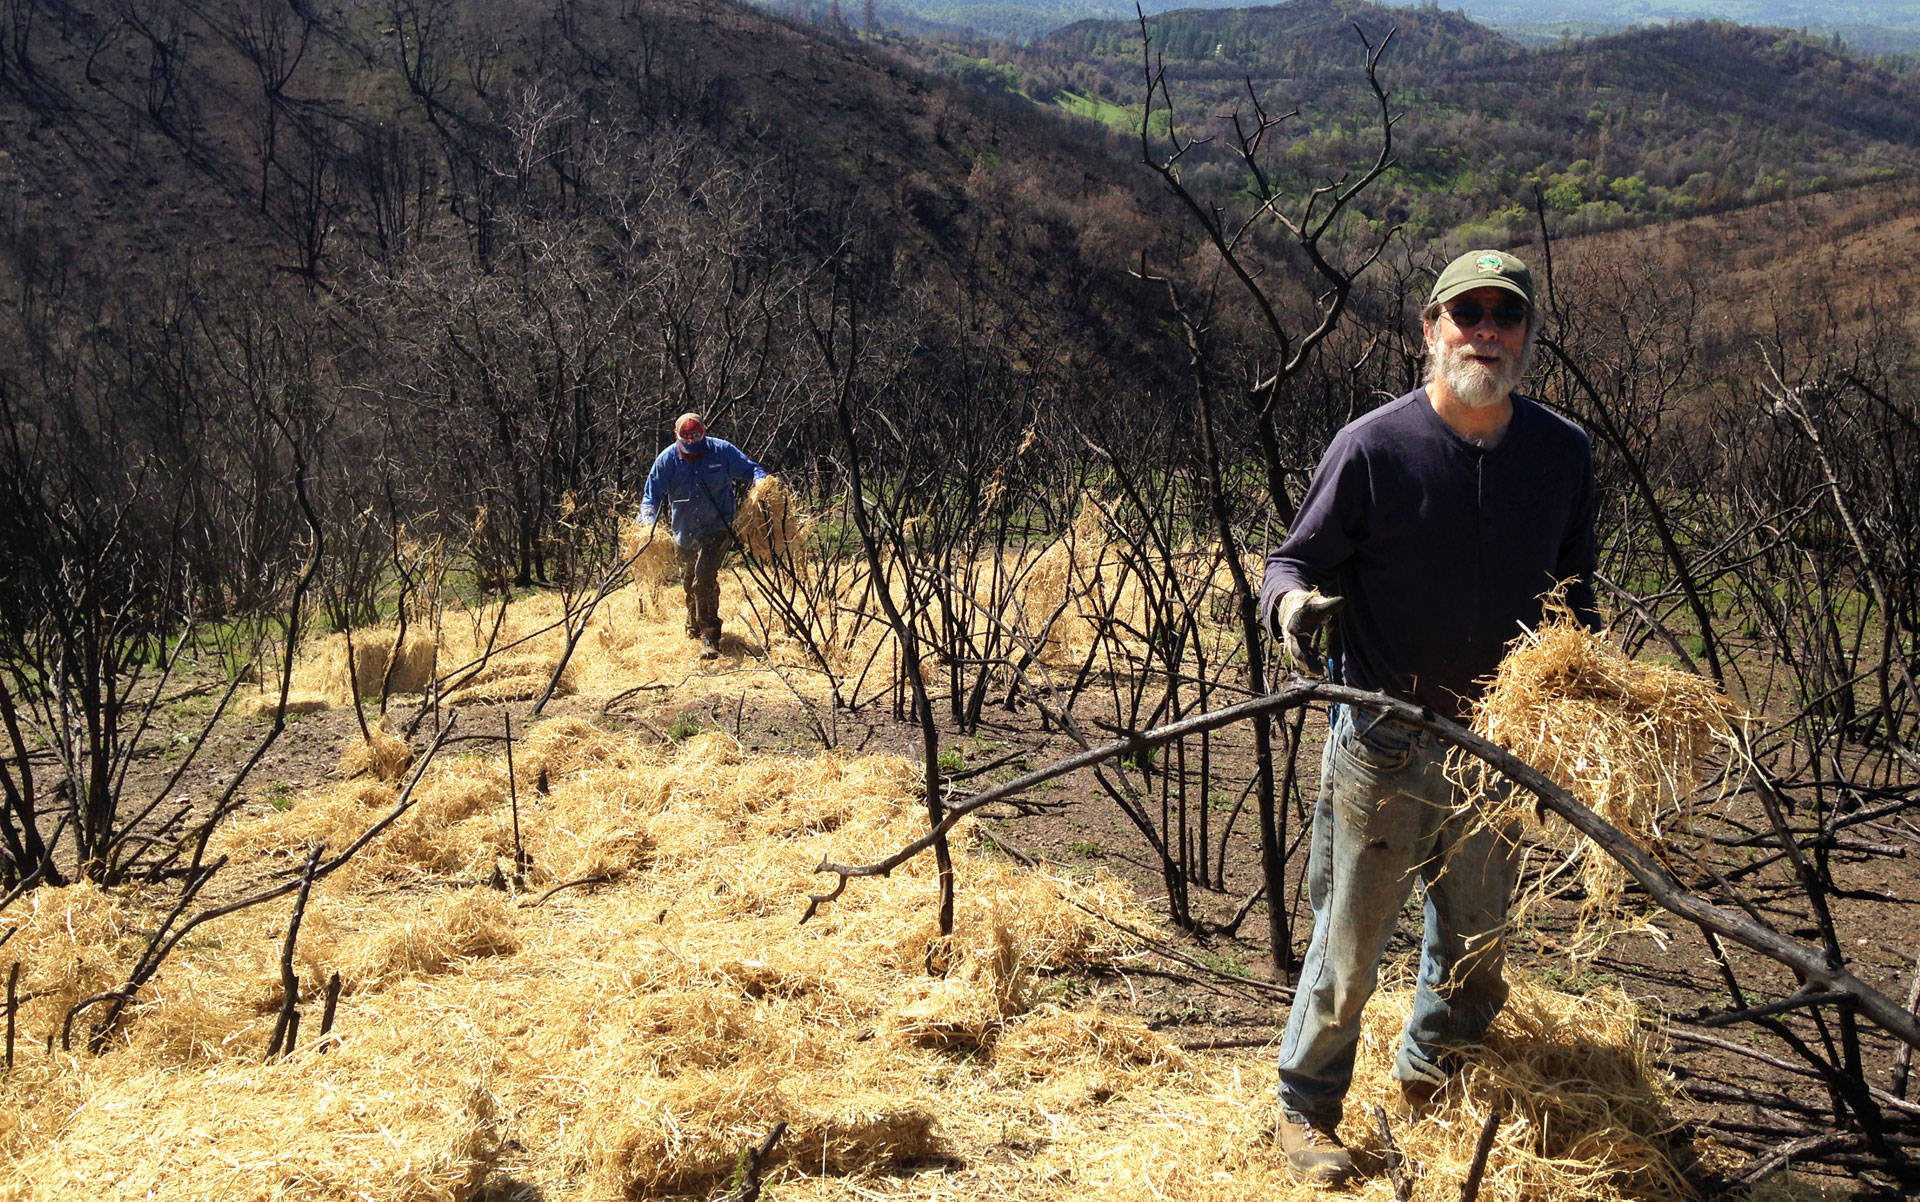 Michael Kriletich and other volunteers with CalaverasGROWN spread straw on scorched hills for erosion control.  Lisa Morehouse/KQED